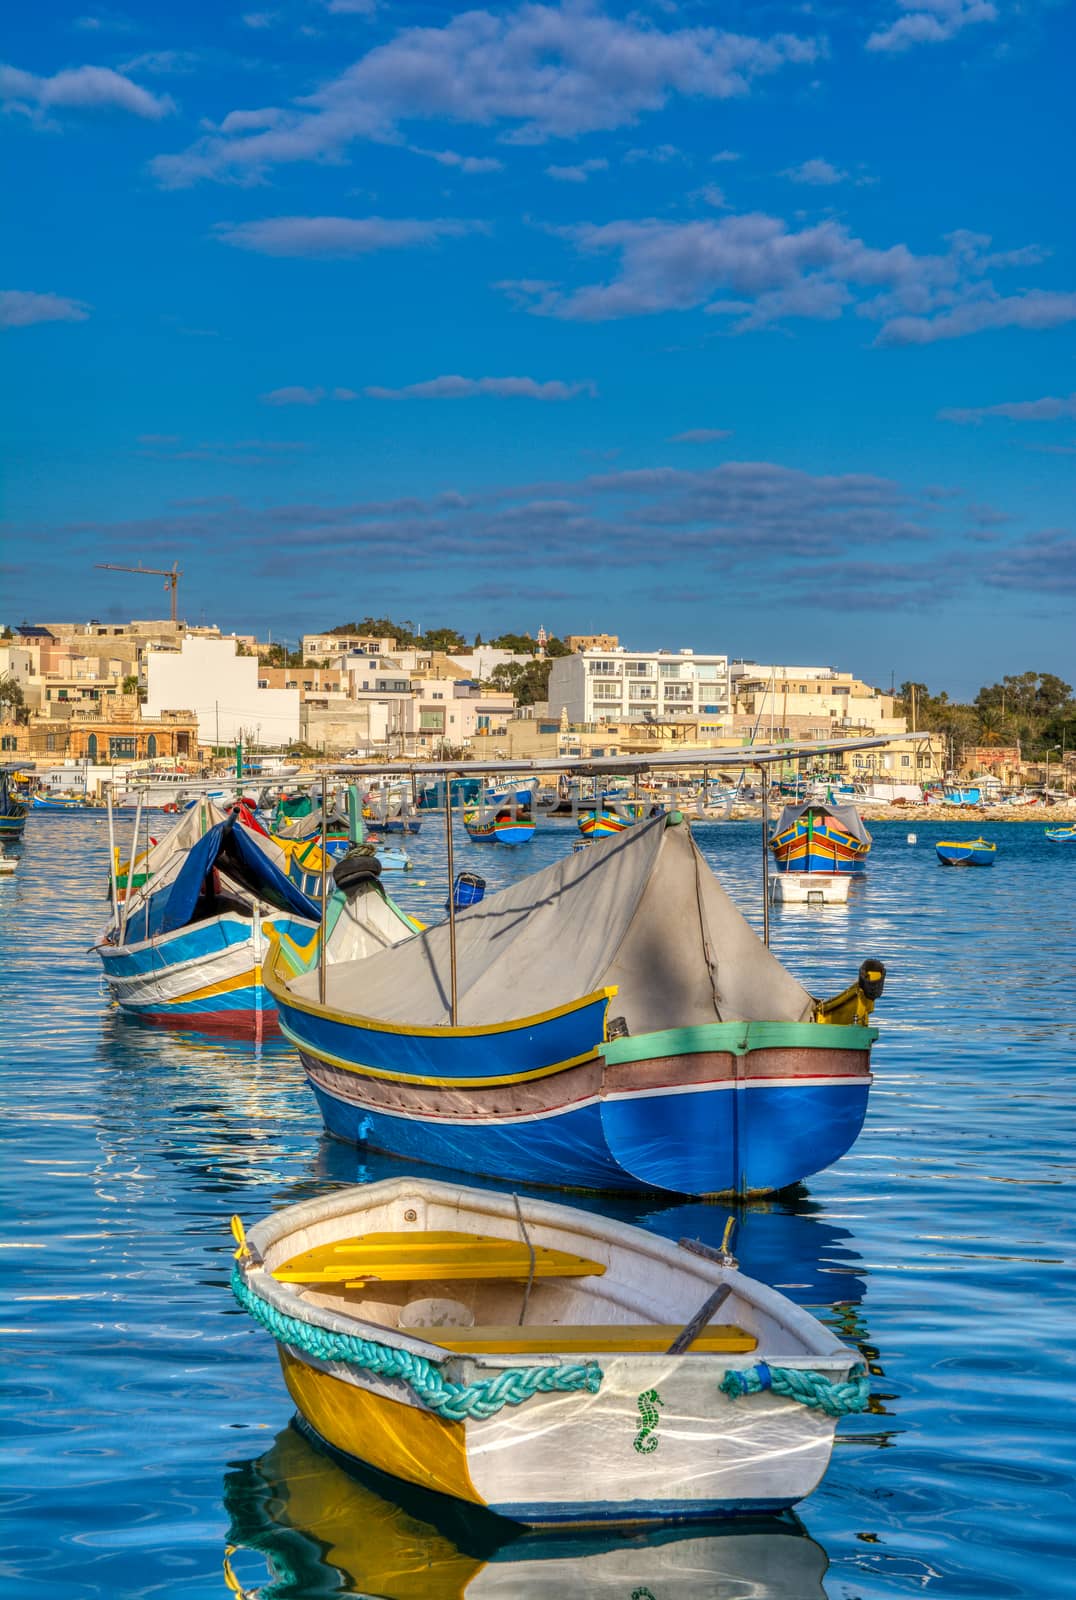 Beautiful view of the traditional eyed colorful boats Luzzu, Malta. by CreativePhotoSpain